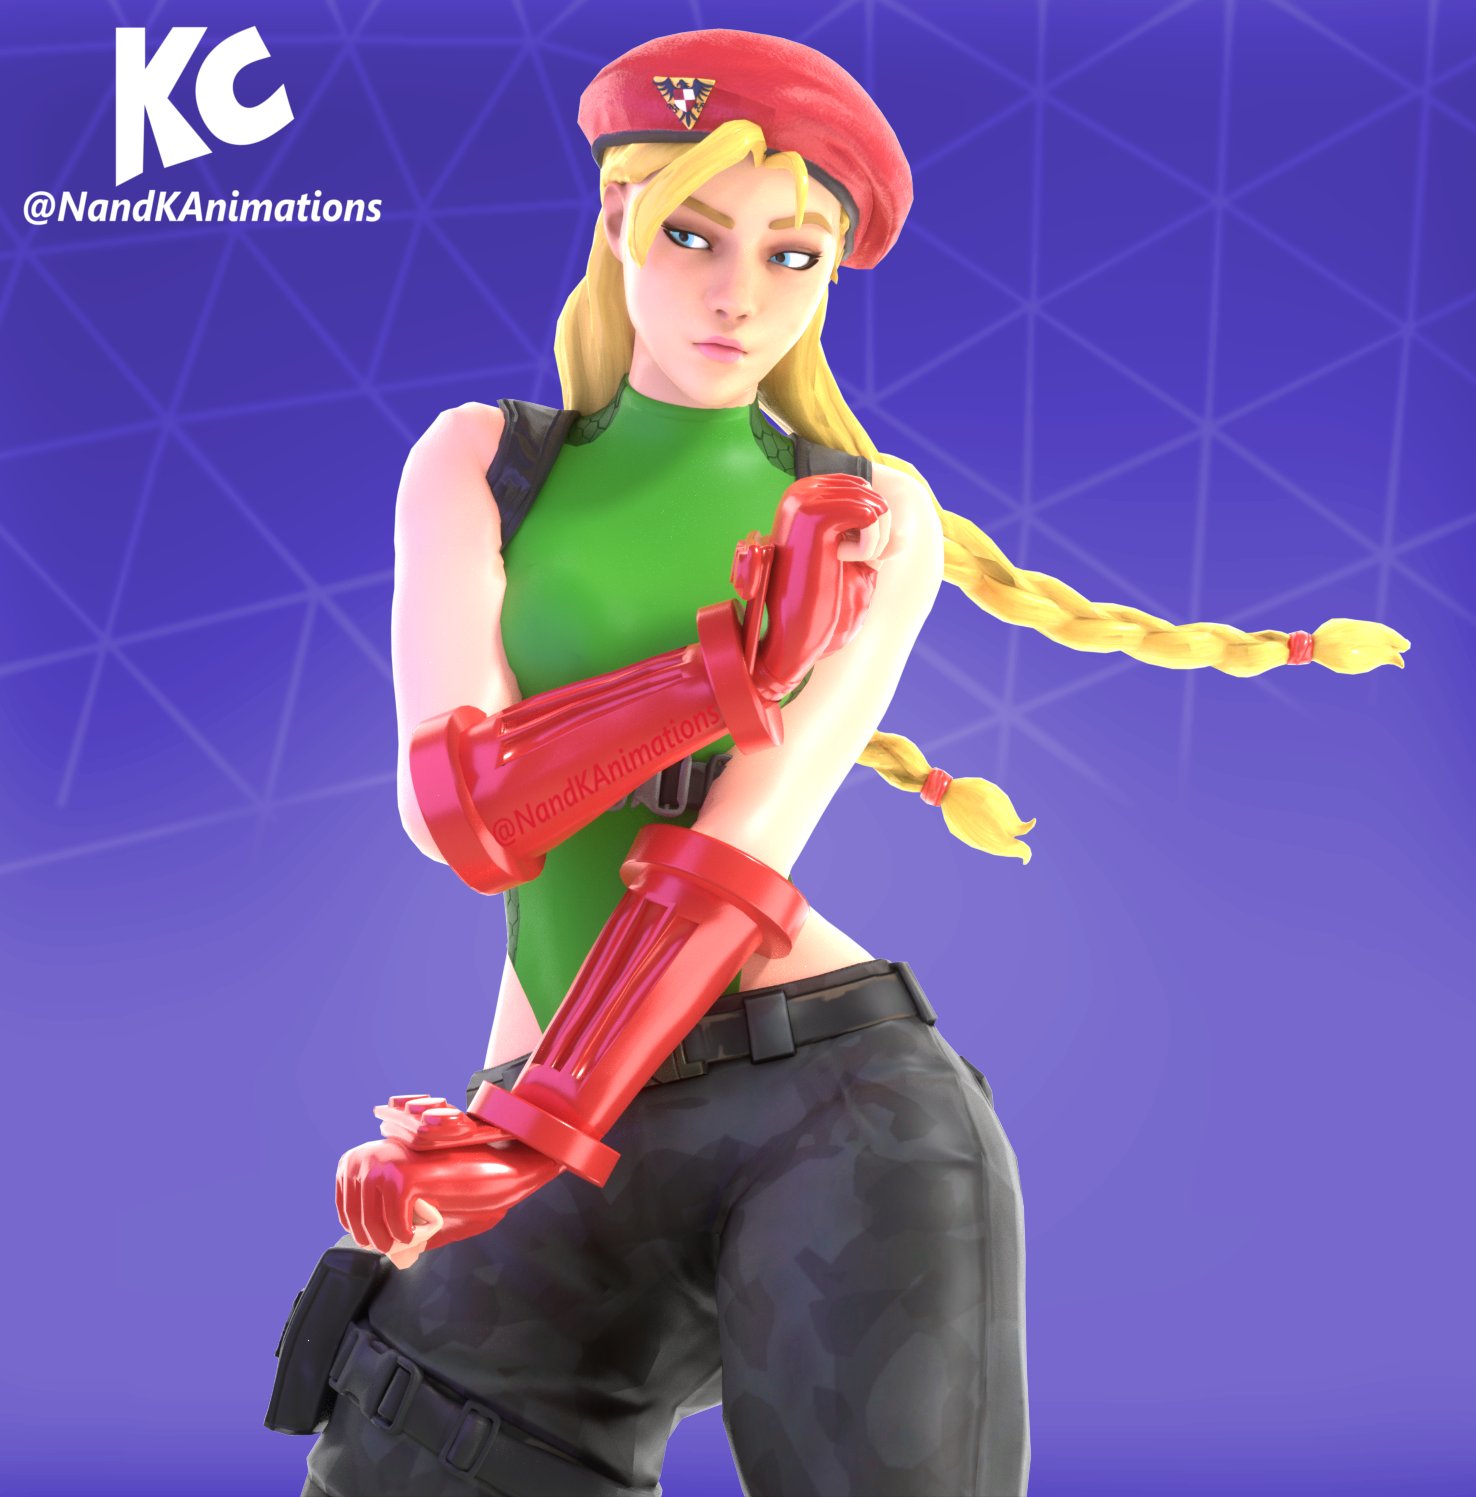 ✨NandKAnimations✨ on X: #Fortnite #FortniteArt #FortniteBlender KC here!💕  Since Gaming Legends is now a rarity, I thought I'd do a concept: Cammy  White from Street Fighter! Really hope to see a collab